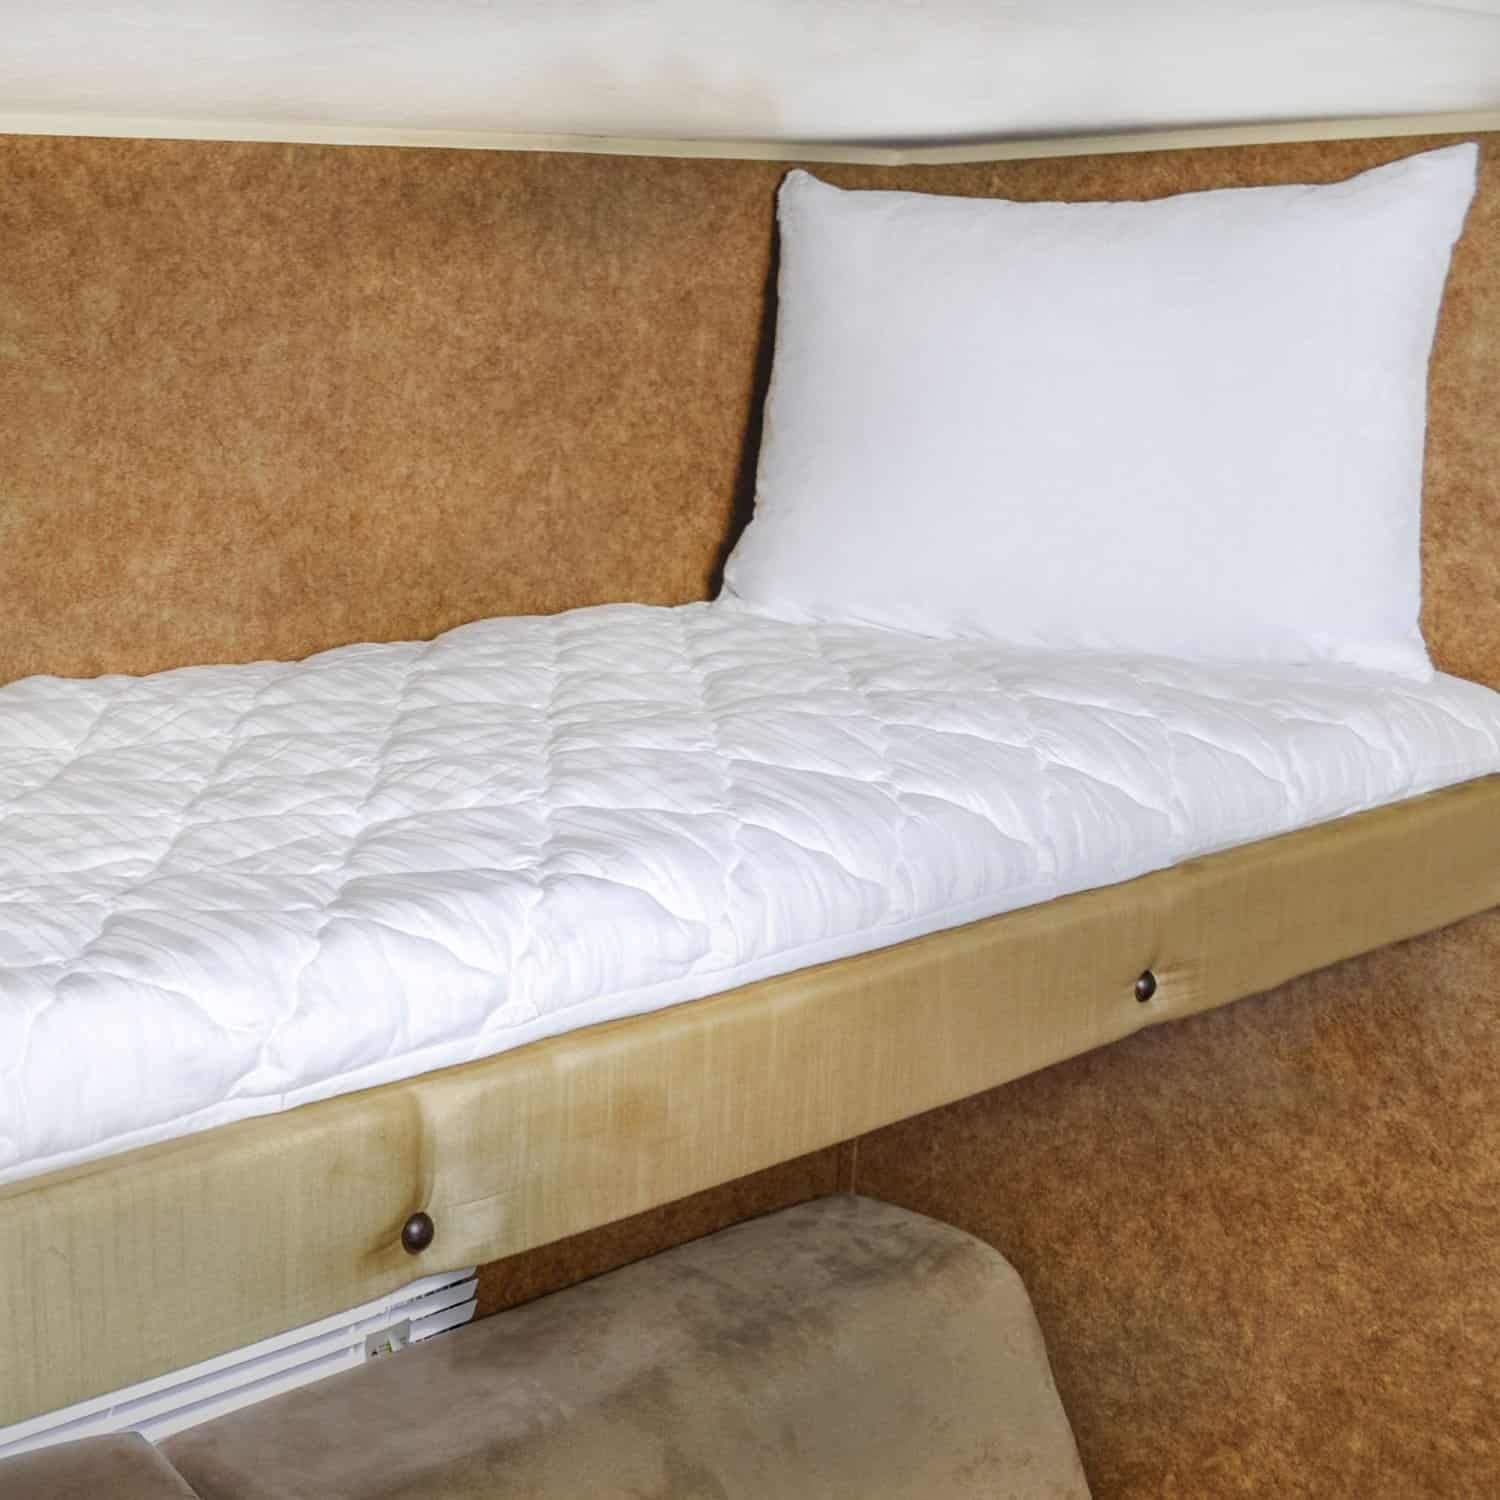 RV Mattress Sizes, Types, and Places To Buy Them - The Sleep ...